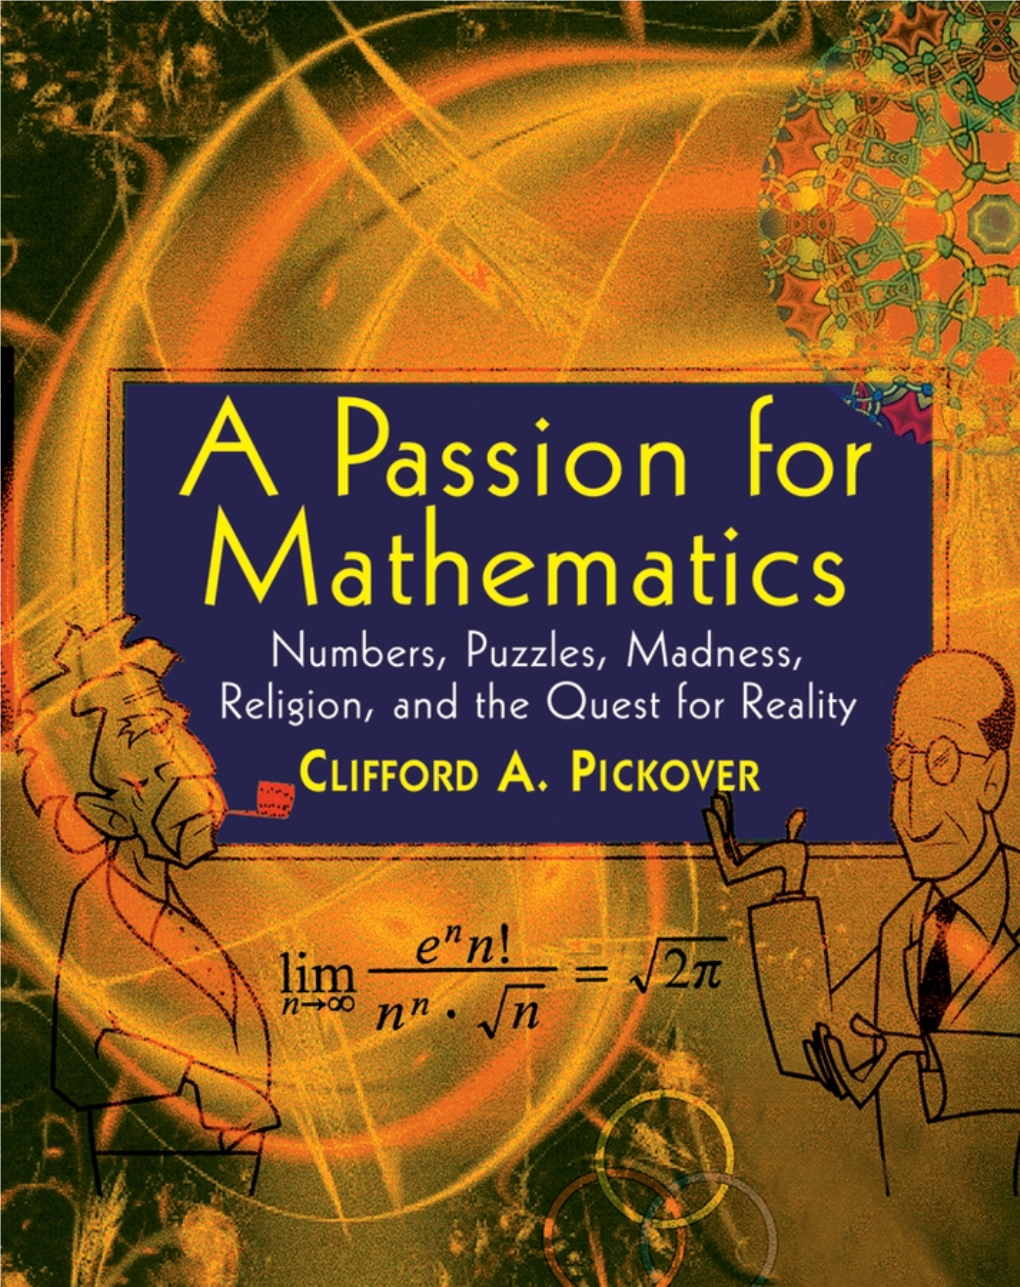 A Passion for Mathematics : Numbers, Puzzles, Madness, Religion, and the Quest for Reality / Clifford A